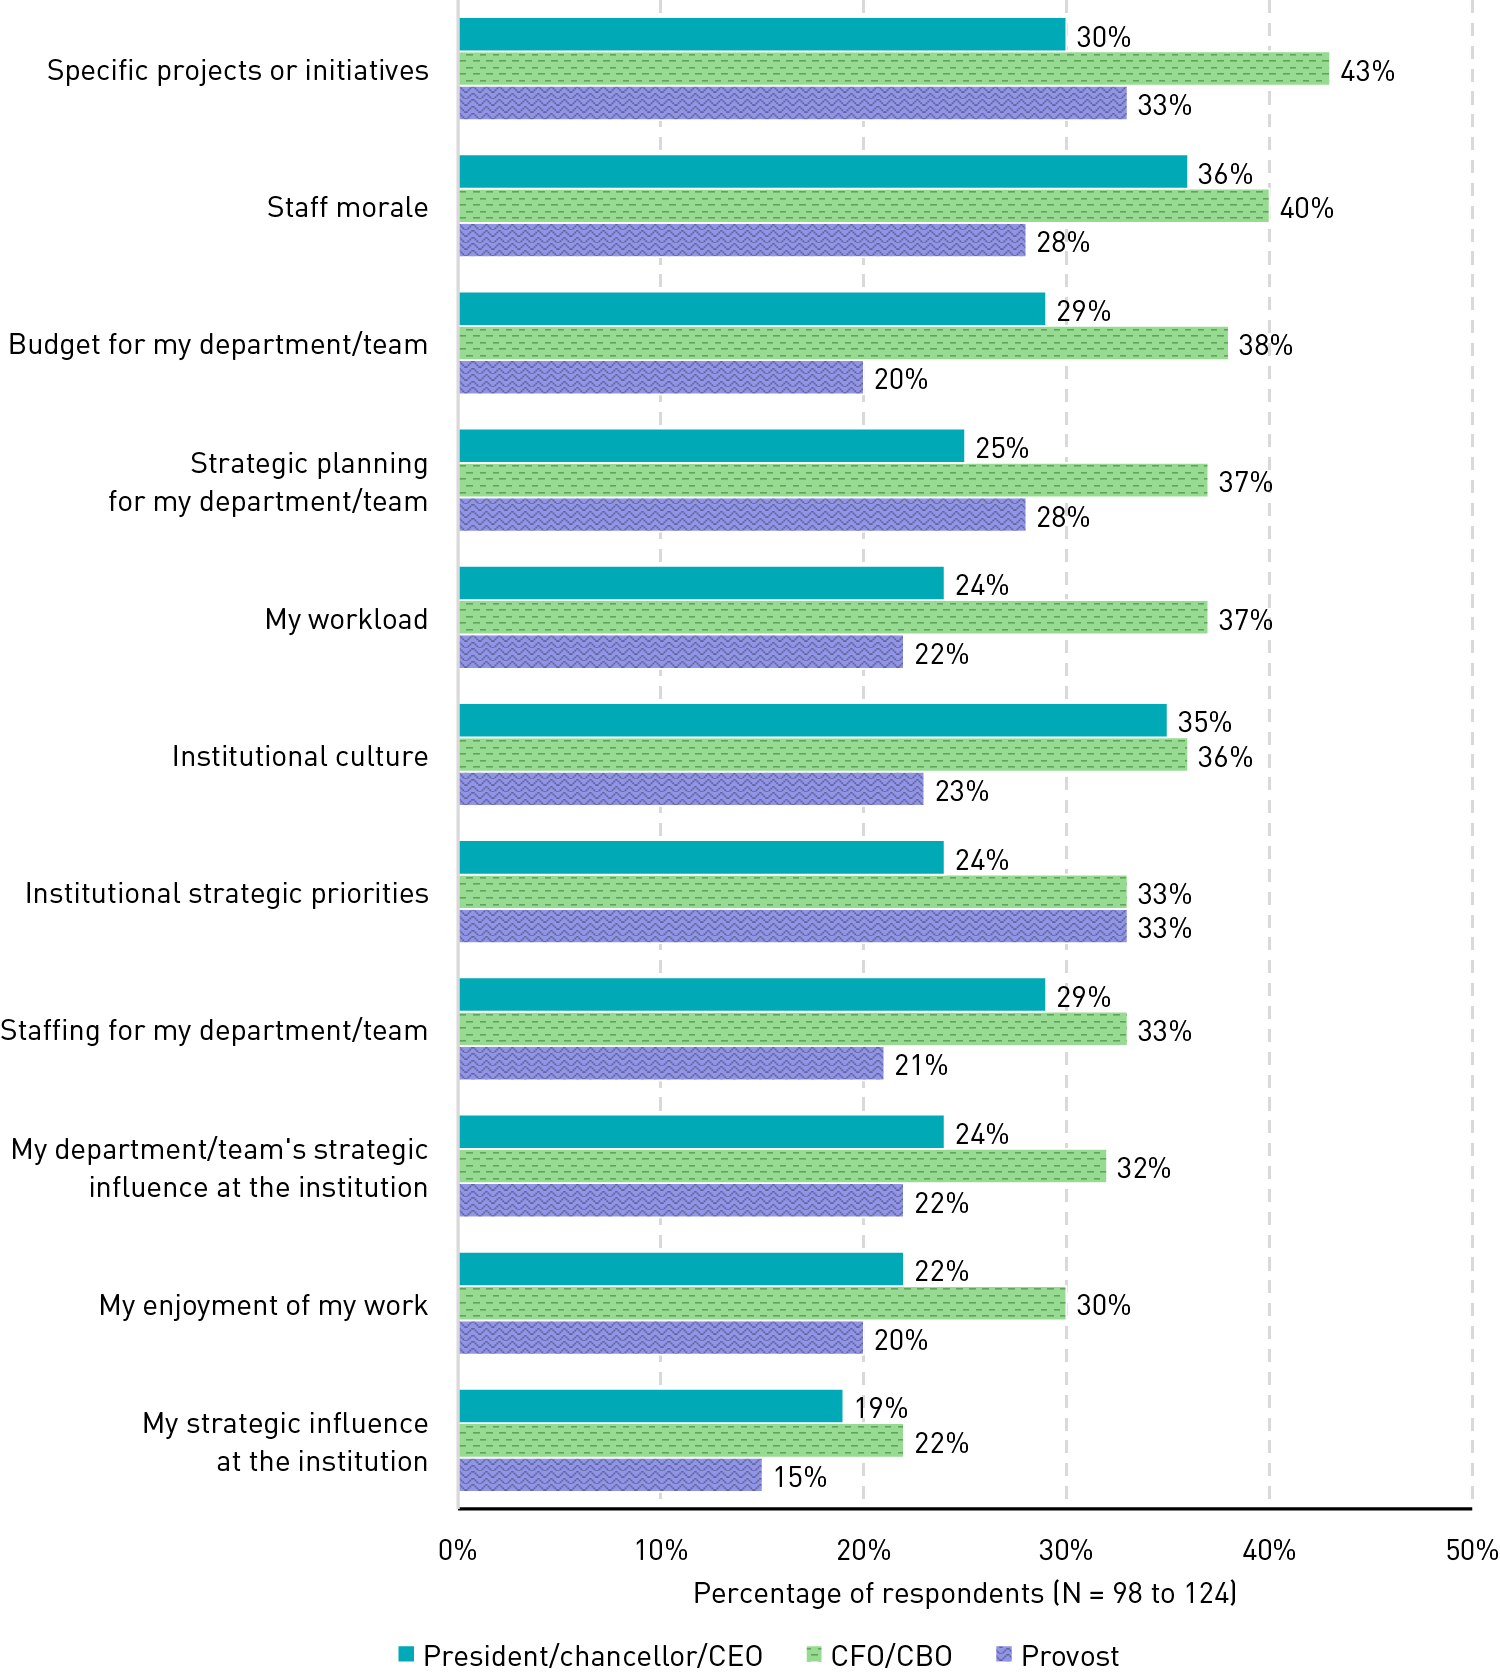 Bar chart showing percentages of respondents who said leader transitions had had negative impacts on work areas, by type of leader. Specific projects or initiatives (president/chancellor/CEO: 30%, CFO/CBO: 43%, provost: 33%), Staff morale (36%, 40%, 28%), Budget for my department/team (29%, 38%, 20%), Strategic planning for my department/team (25%, 37%, 28%), My workload (24%, 37%, 22%), Institutional culture (35%, 36%, 23%), Institutional strategic priorities (24%, 33%, 33%), Staffing for my department/team (29%, 33%, 21%), My department/team's strategic influence at the institution (24%, 32%, 22%), My enjoyment of my work (22%, 30%, 20%), My strategic influence at the institution (19%, 22%, 15%).